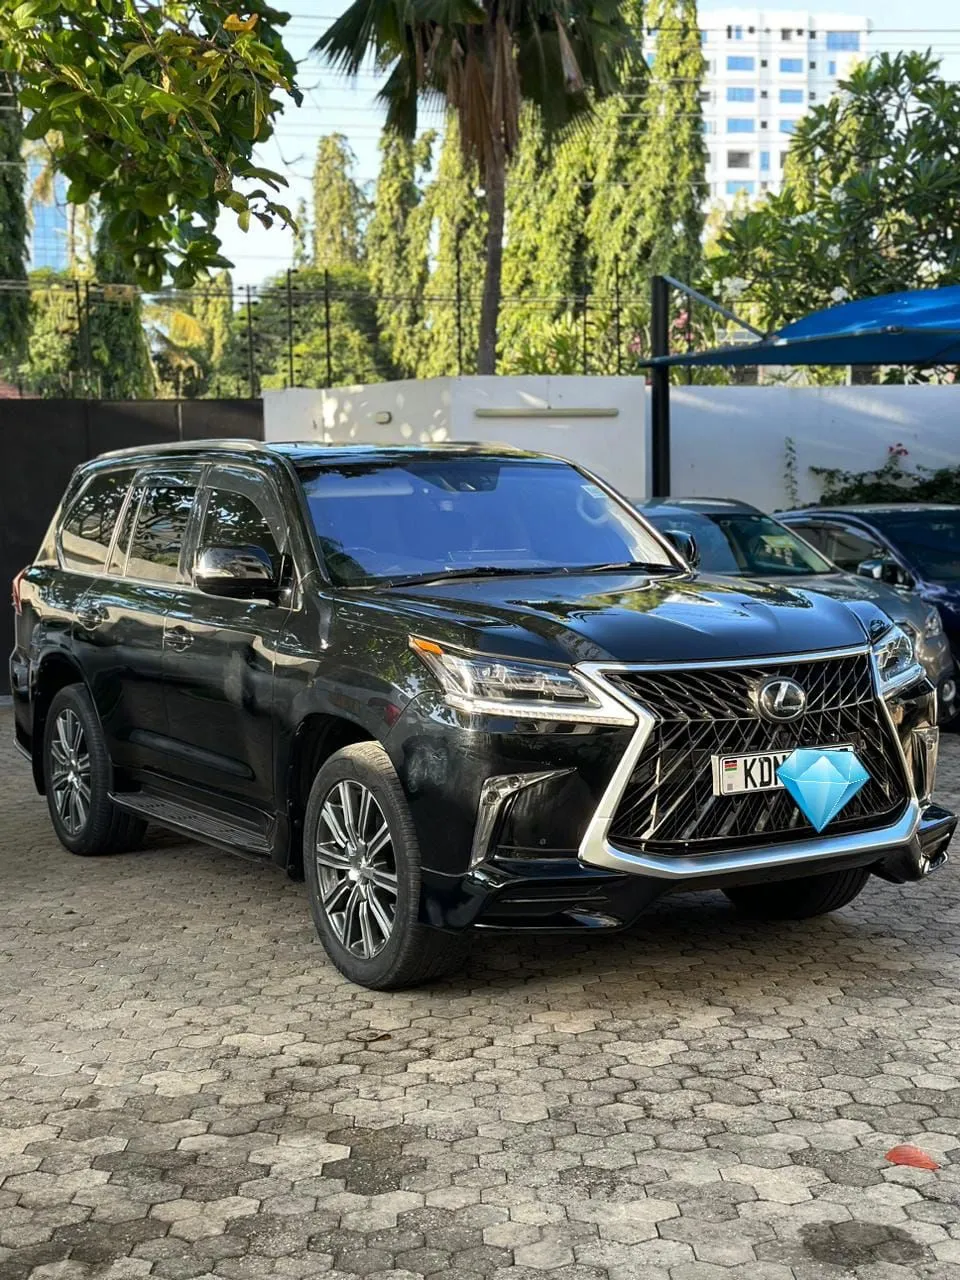 LEXUS LX 570 Kenya asian owners CHEAPEST 🔥 Lexus lx 570 for sale in kenya HIRE PURCHASE installments OK EXCLUSIVE For SALE in Kenya